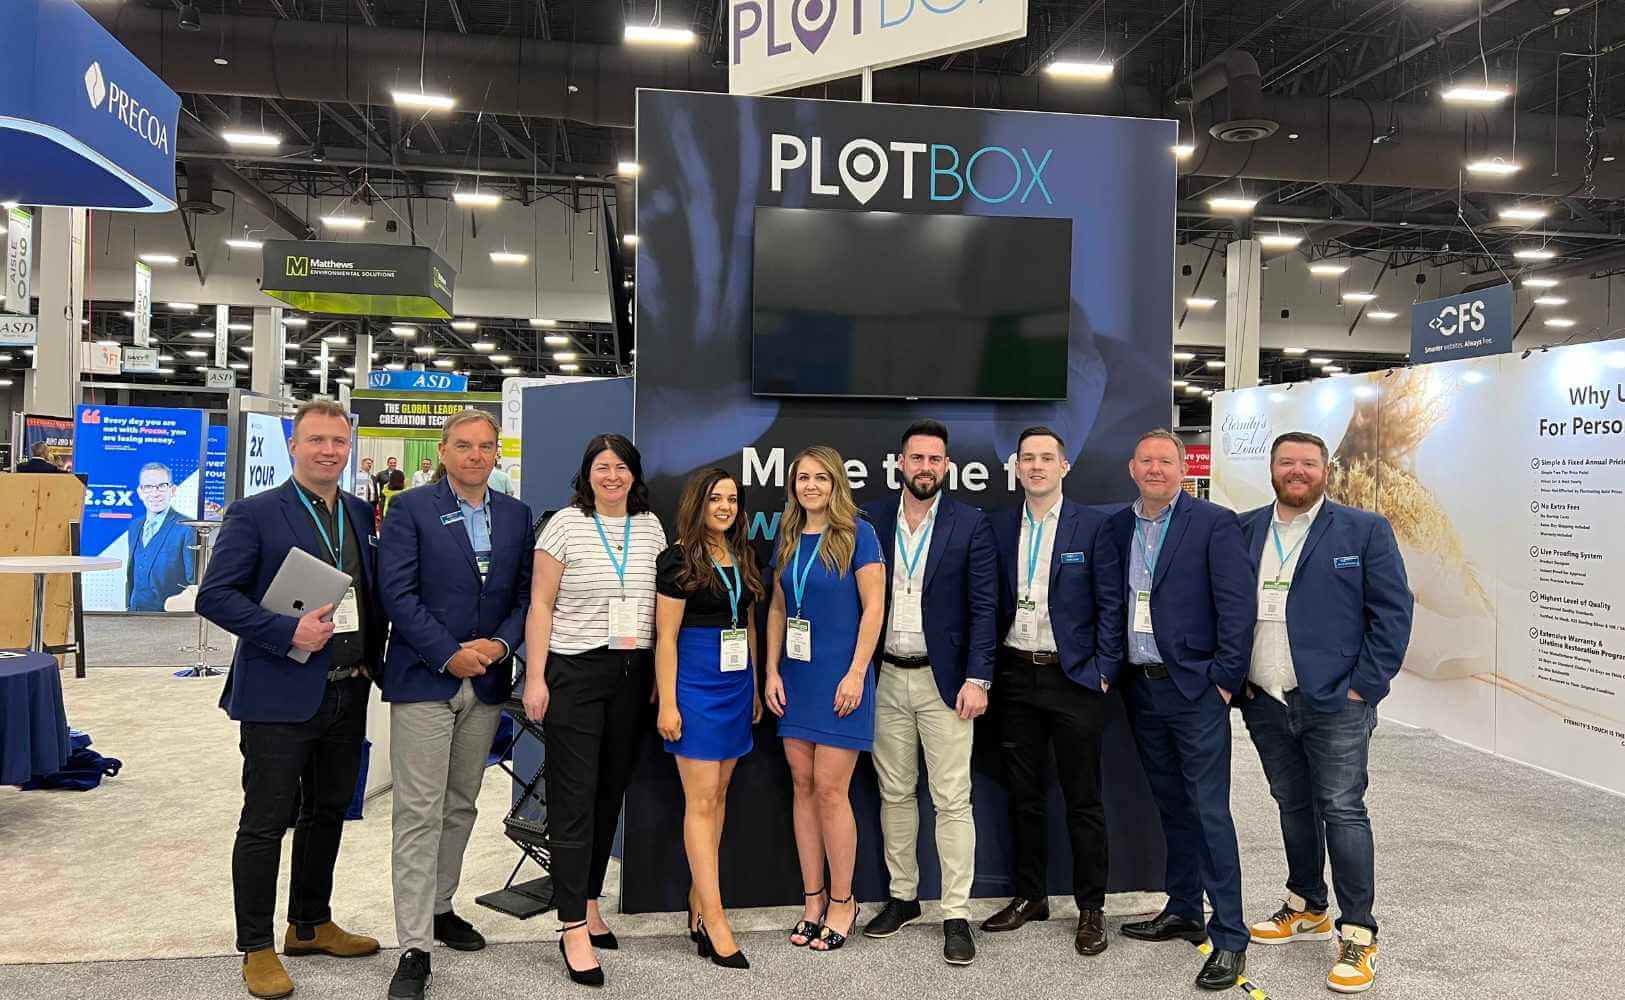 PlotBox staff at a conference